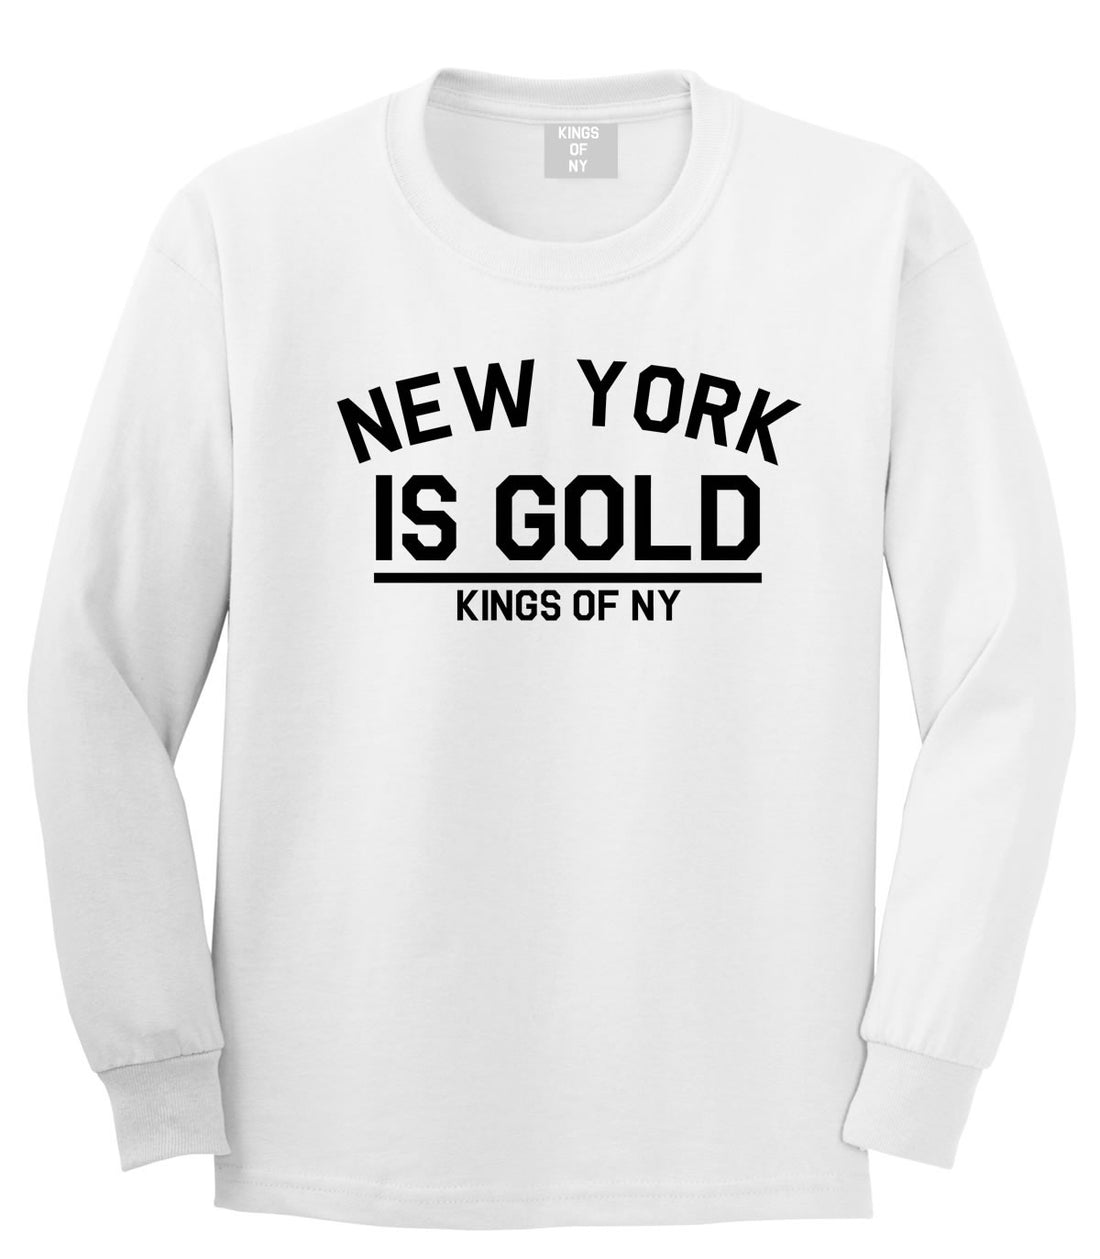 New York Is Gold Long Sleeve T-Shirt in White by Kings Of NY